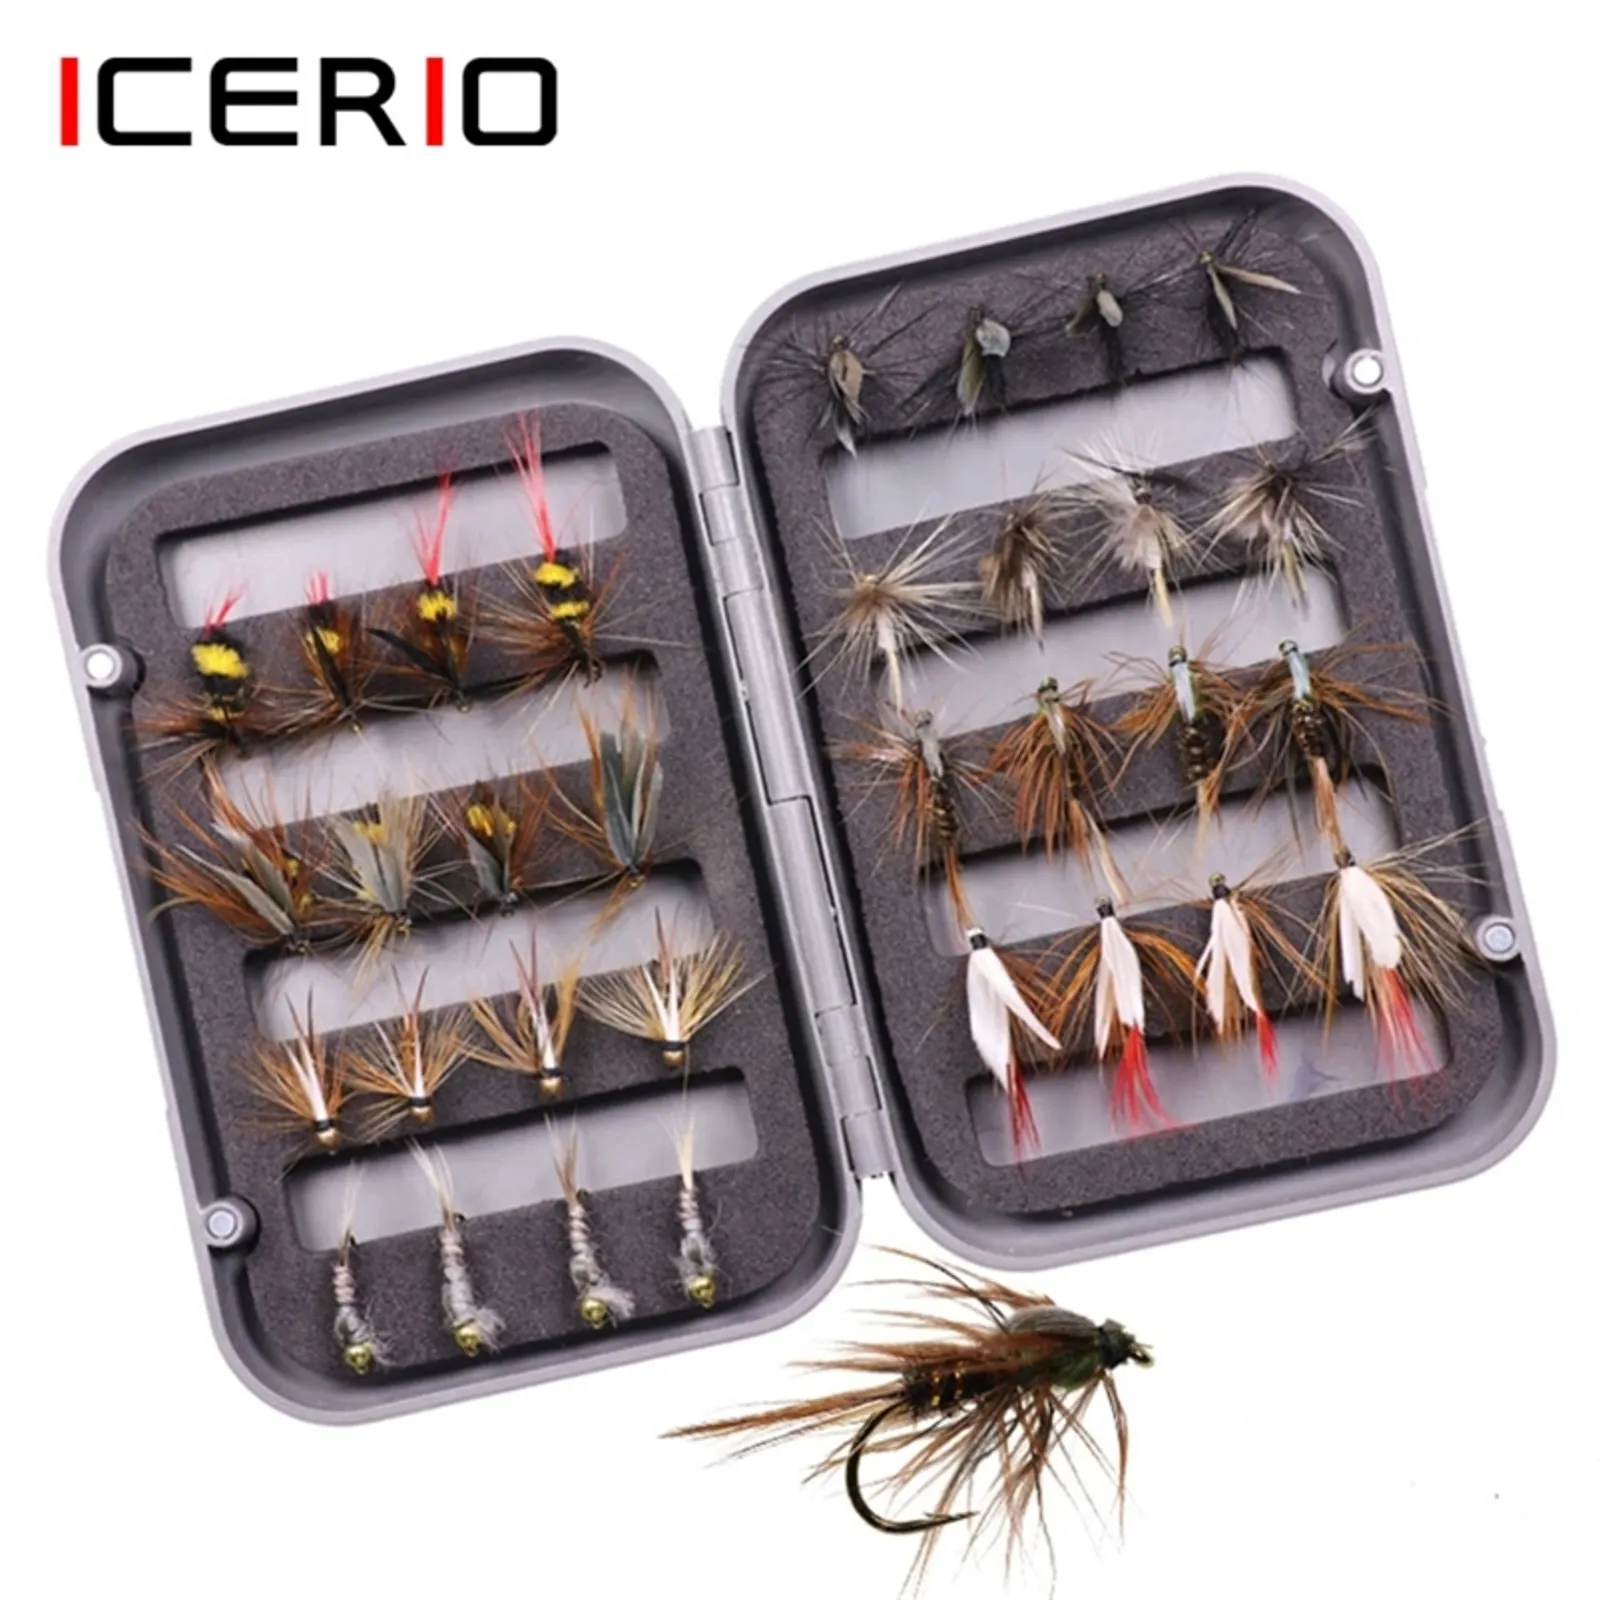 ICERIO Assorted Fly Fishing Kit With Nymph Dry/Wet Flies Trout